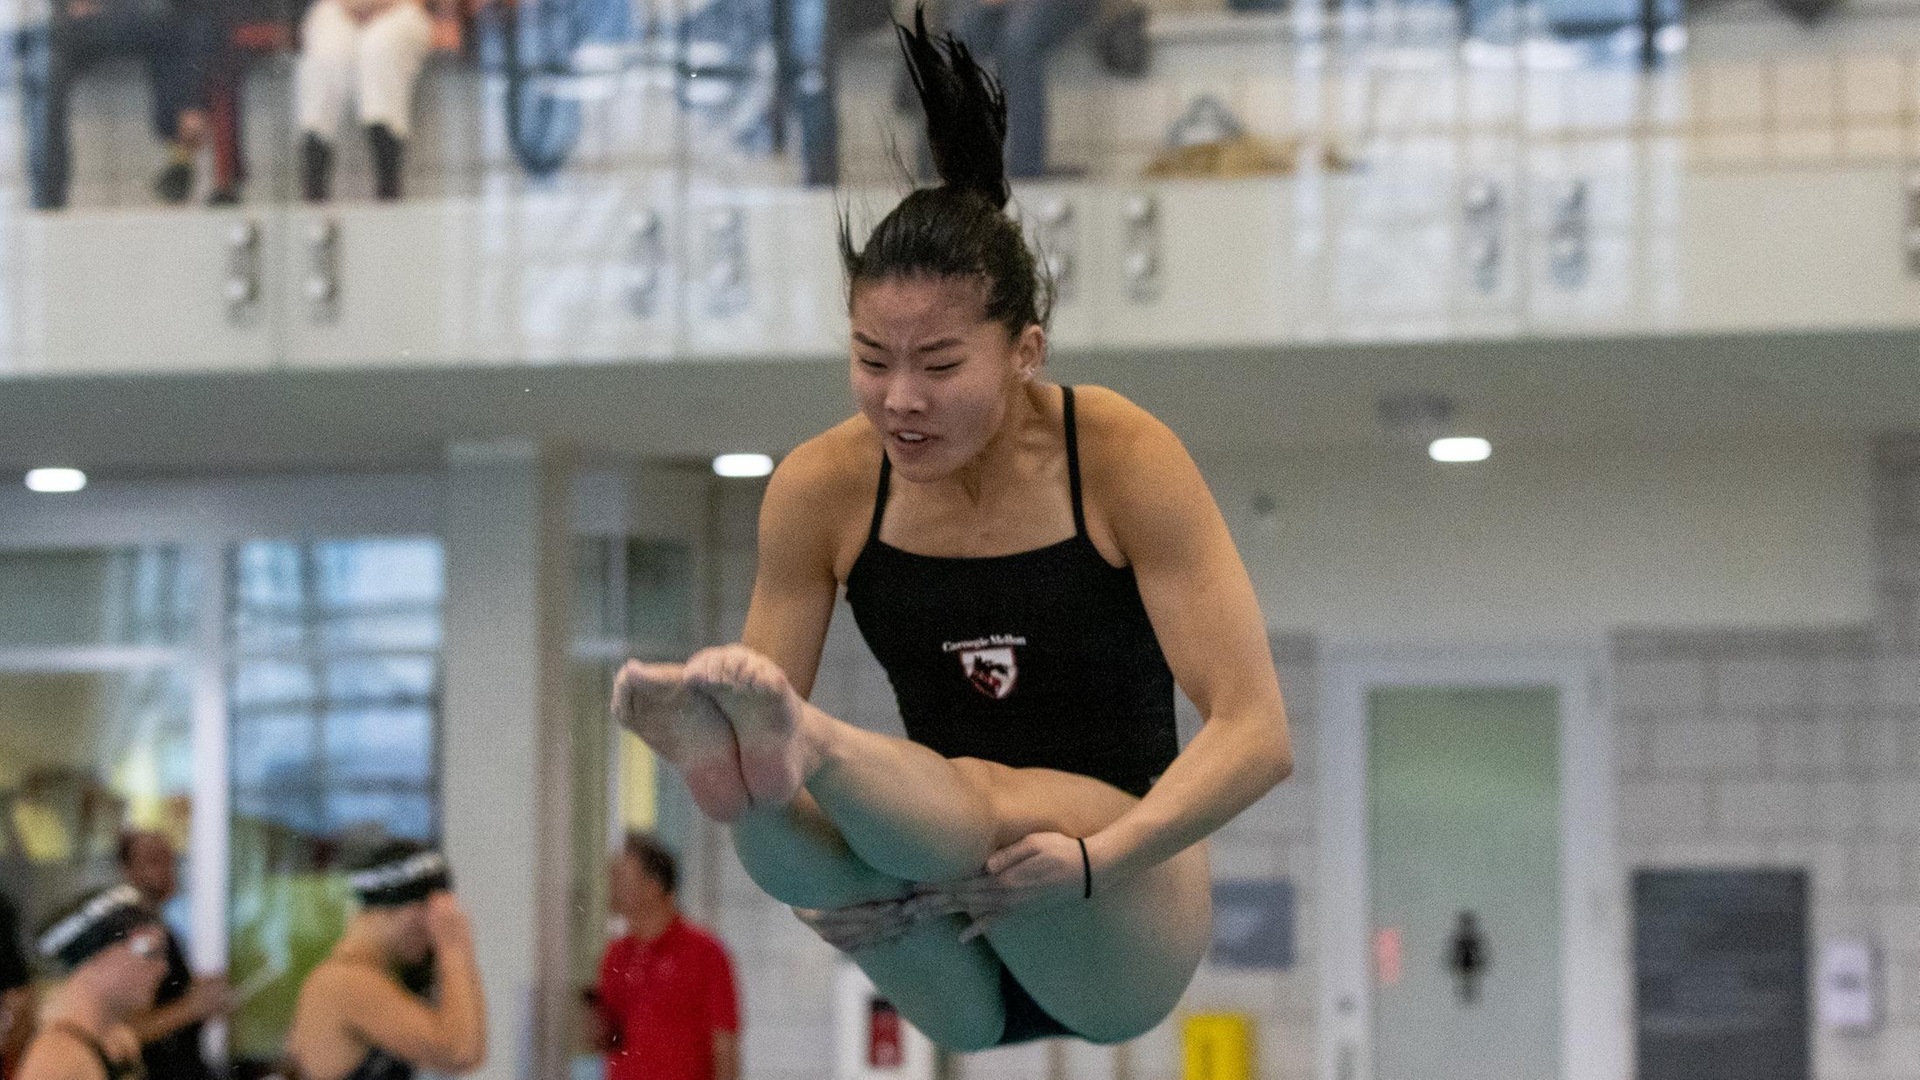 women's diver in air holding legs straight behind her knees